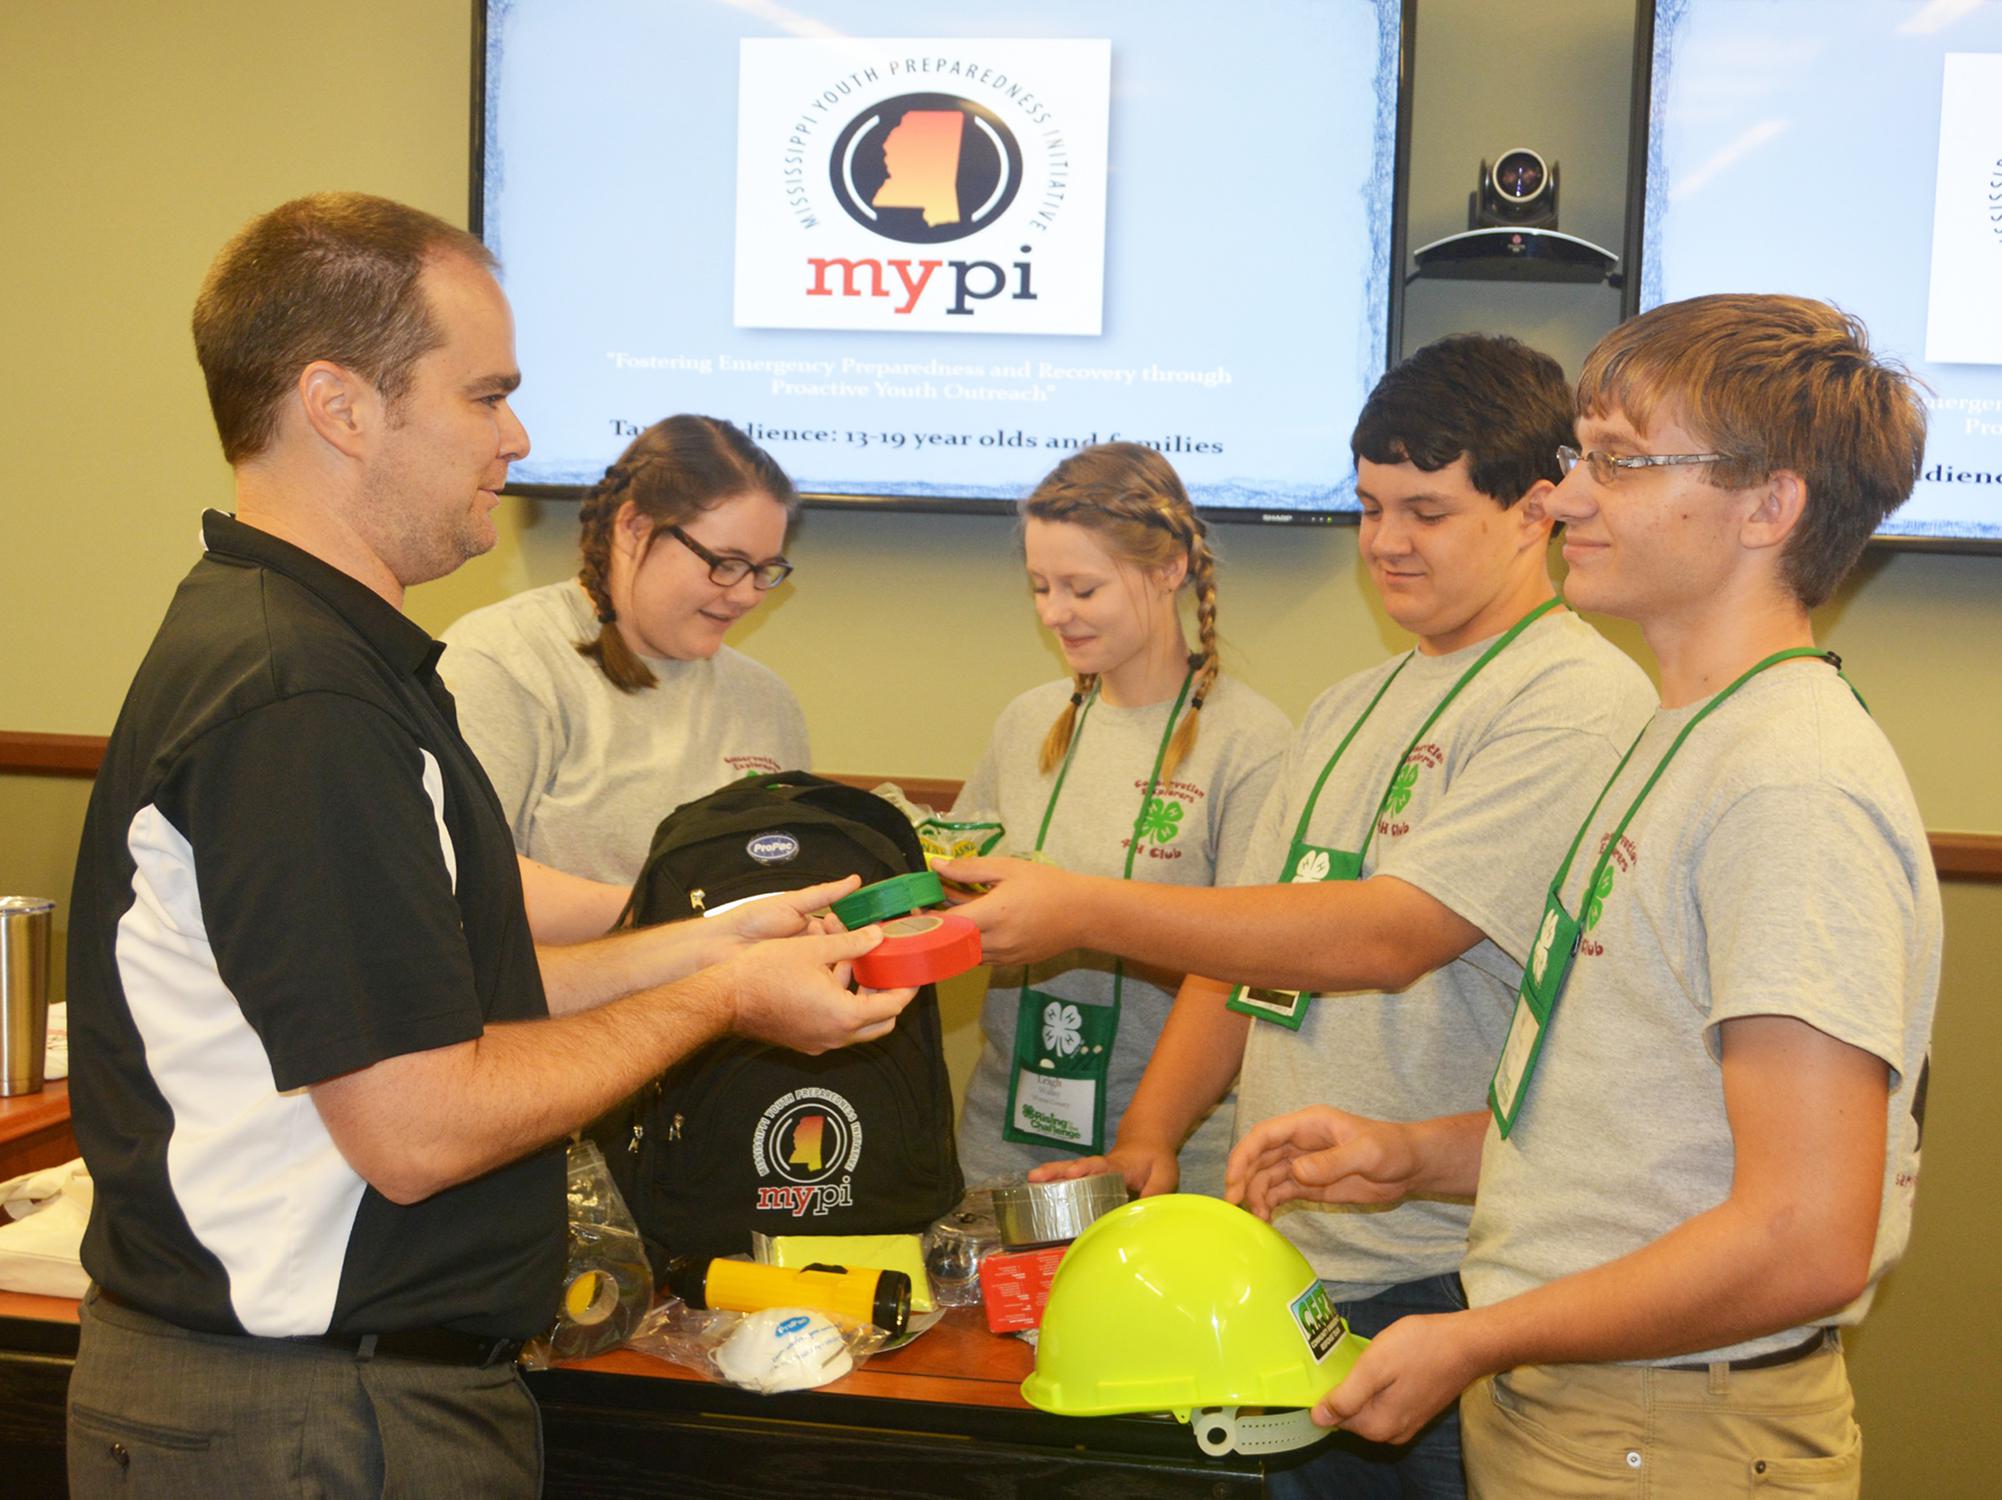 Ryan Akers (left), an assistant Extension professor in the Mississippi State University School of Human Sciences, helps 4-H members examine items in a disaster preparedness backpack. Madison Crawford (second from left) and Leigh Anne Walley, both of Greene County, joined Caleb Walley and Bo Henderson, both of Wayne County, in the workshop on June 1 at the 2017 State 4-H Congress in Starkville, Mississippi. (Photo by MSU Extension Service/Linda Breazeale)